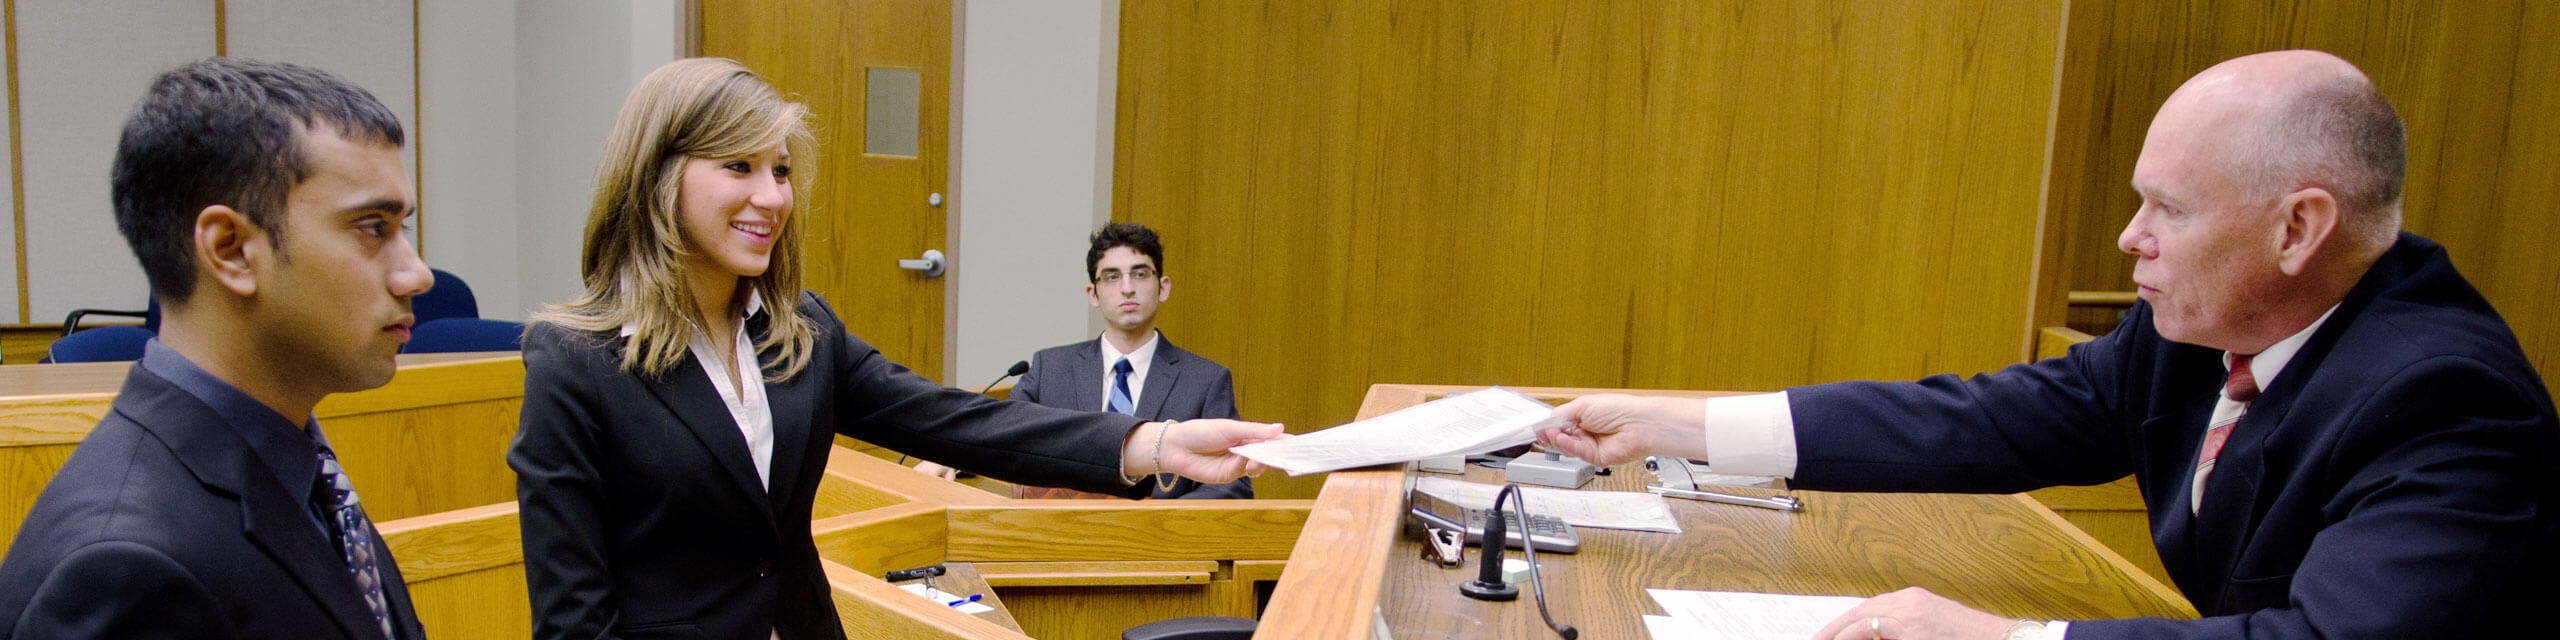 Two lawyers approach the bench in a mock trial.